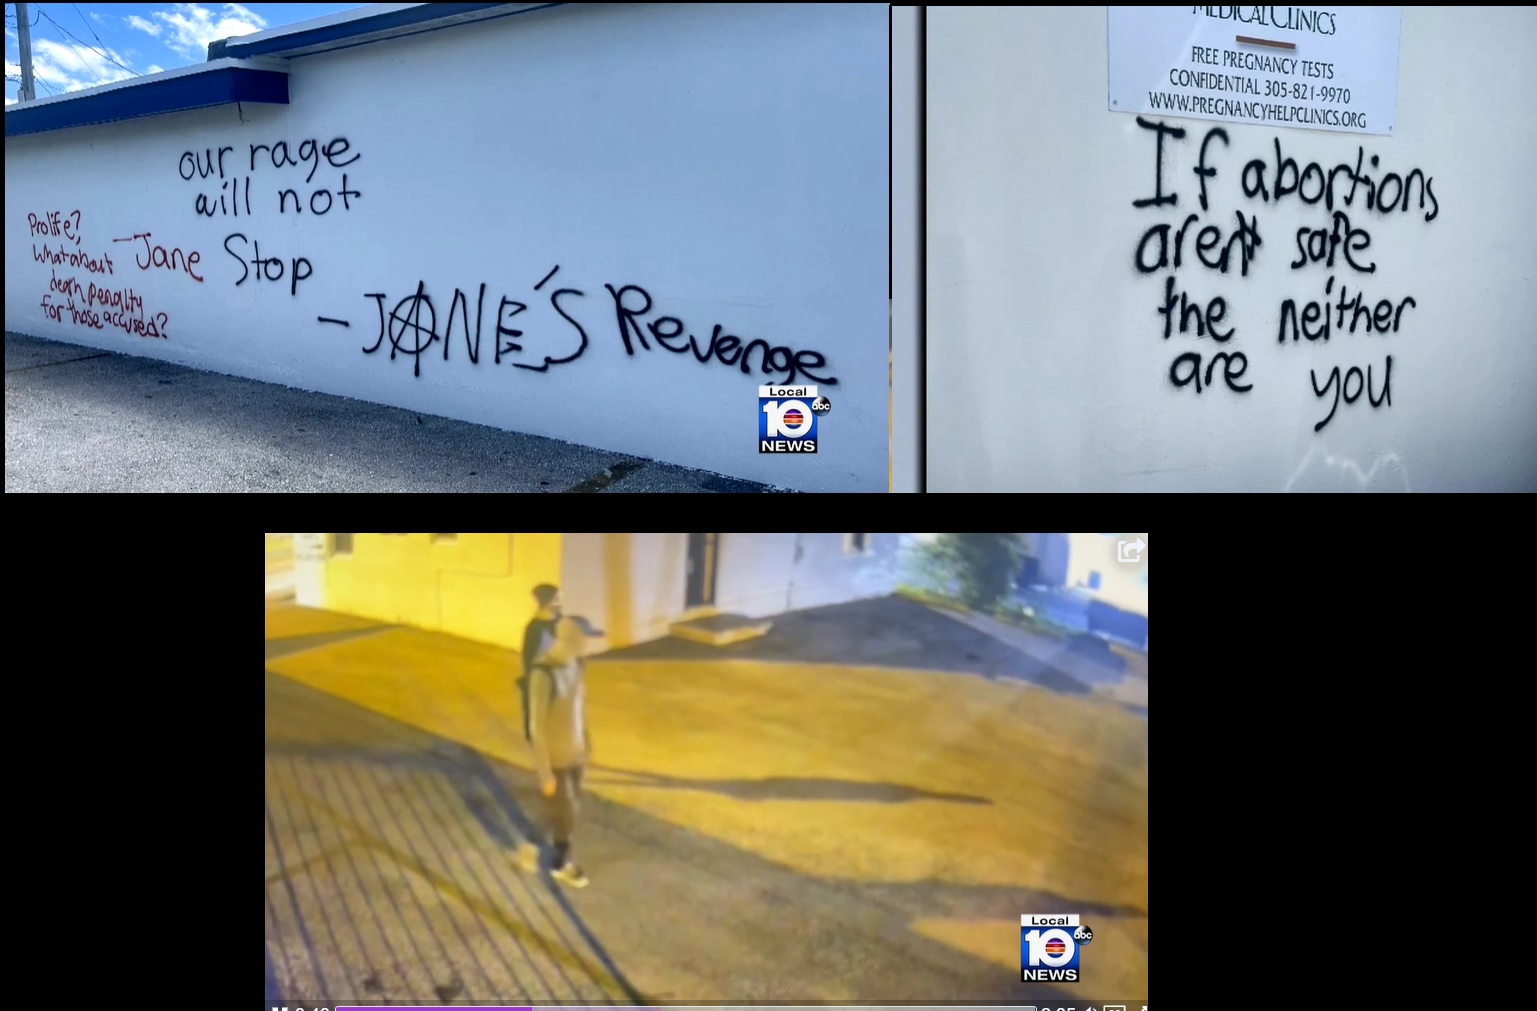 Image: Heartbeat of Miami pregnancy center in Hialeah FL vandalized with Janes Revenge messages